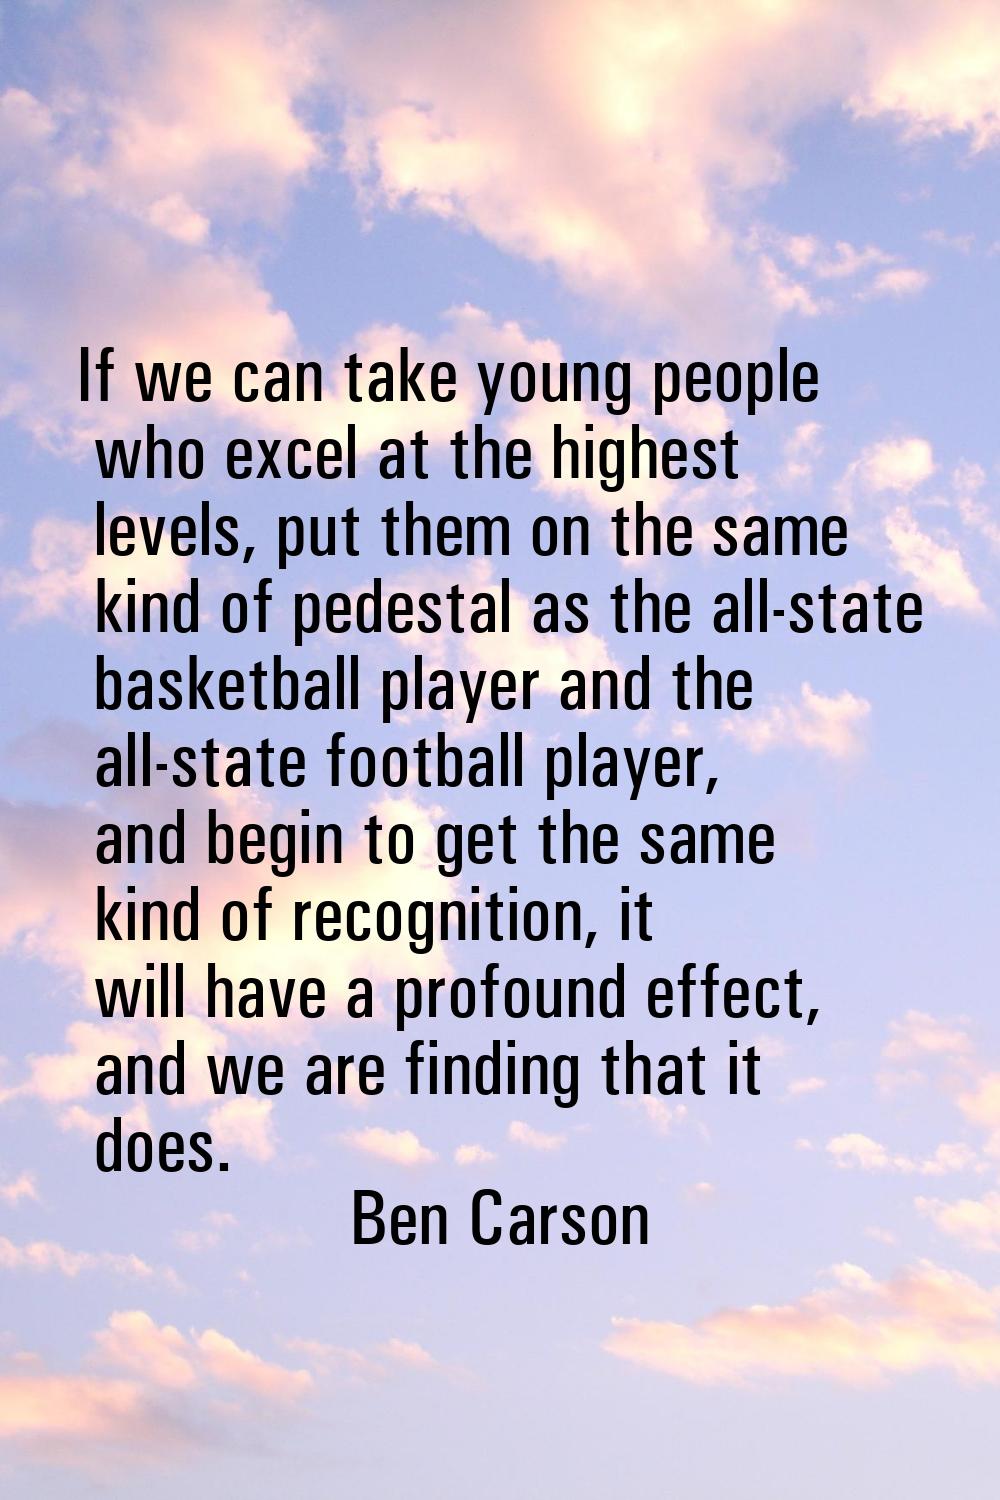 If we can take young people who excel at the highest levels, put them on the same kind of pedestal 